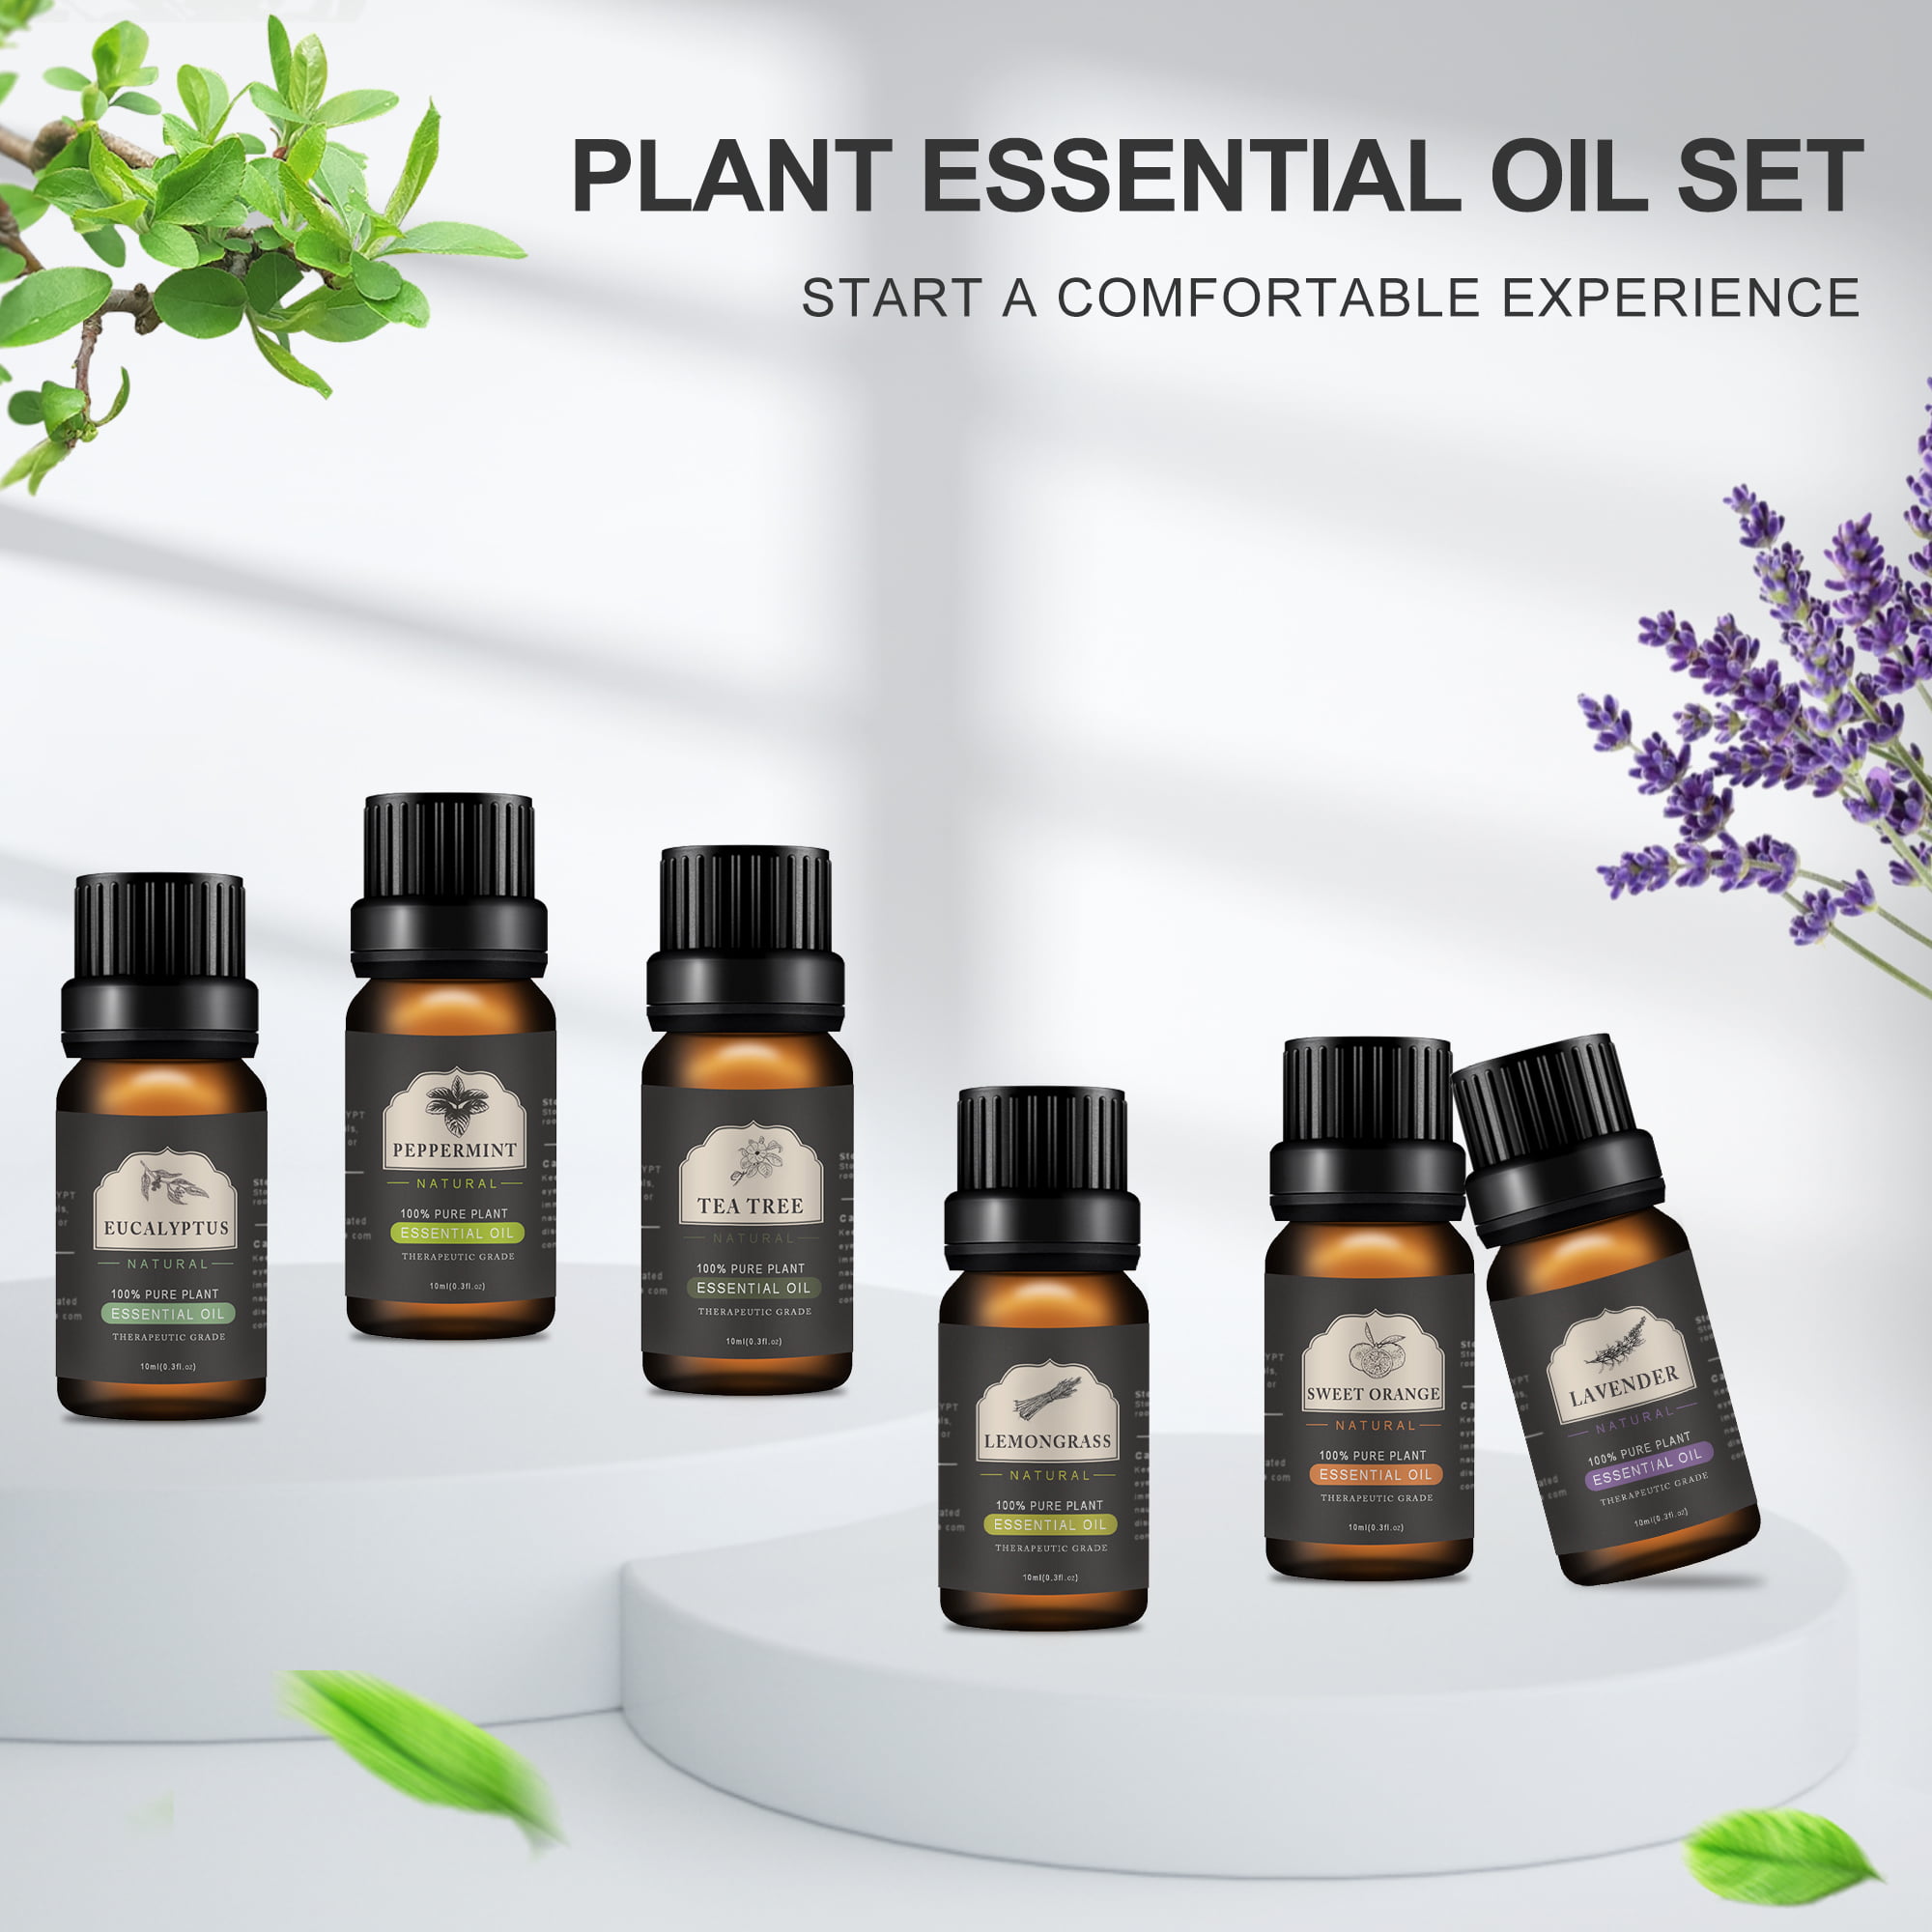 30 * 10ML Essential Oil Set - Essential Oils - 100% Natural Essential Oils  - Perfect for Diffuser,Humidifier, Aromatherapy, Massage, Skin, Hair